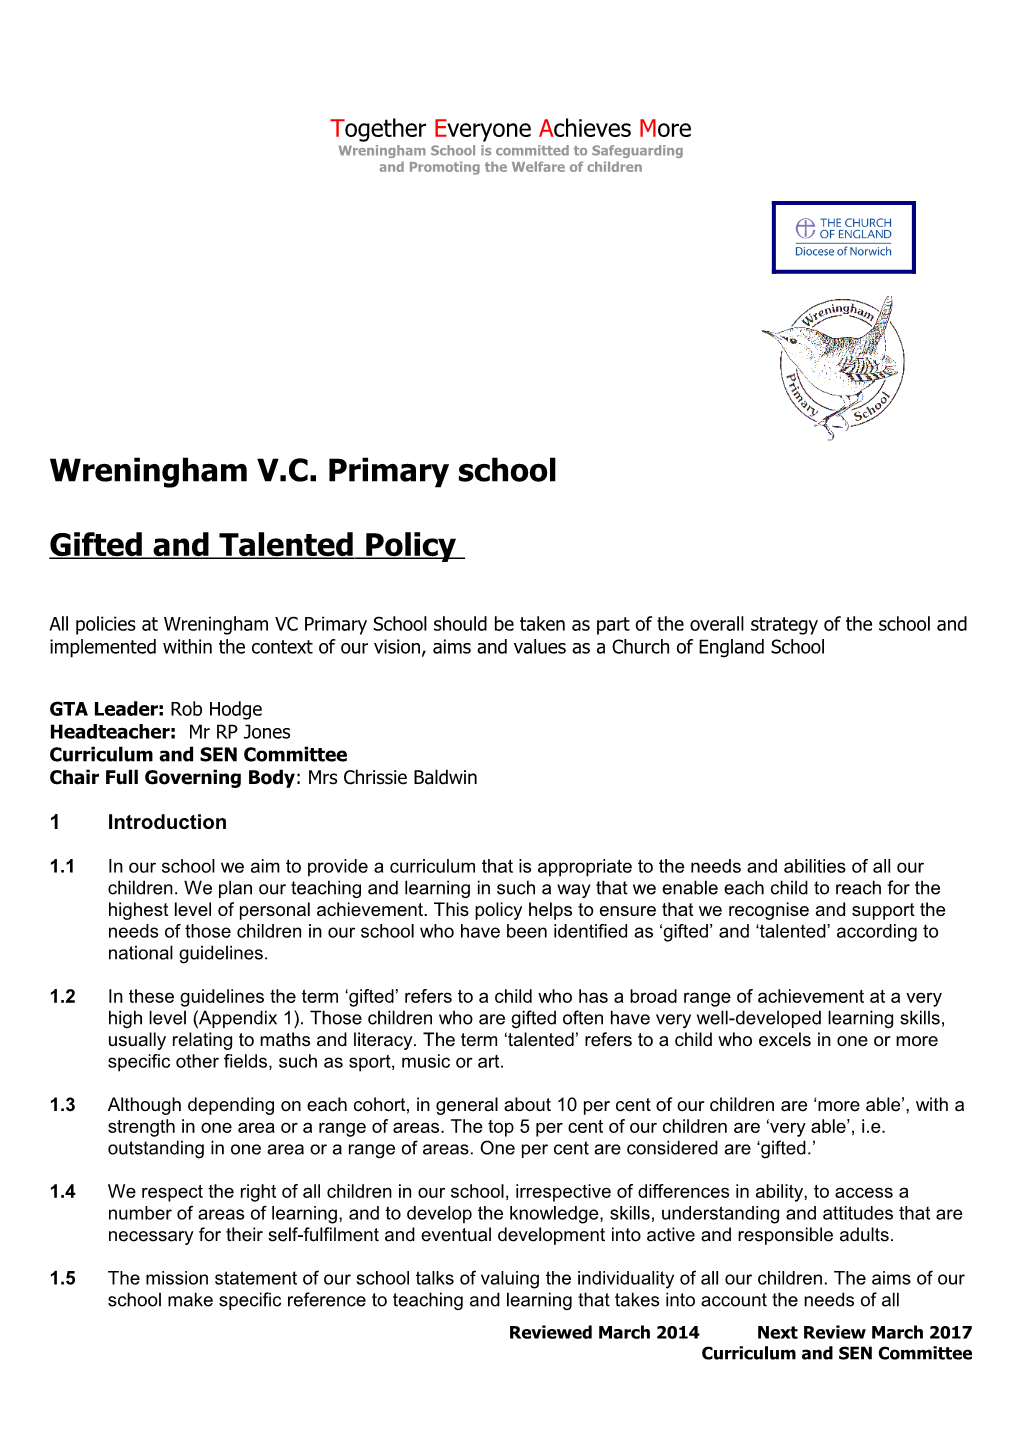 Gifted and Talented Children Policy